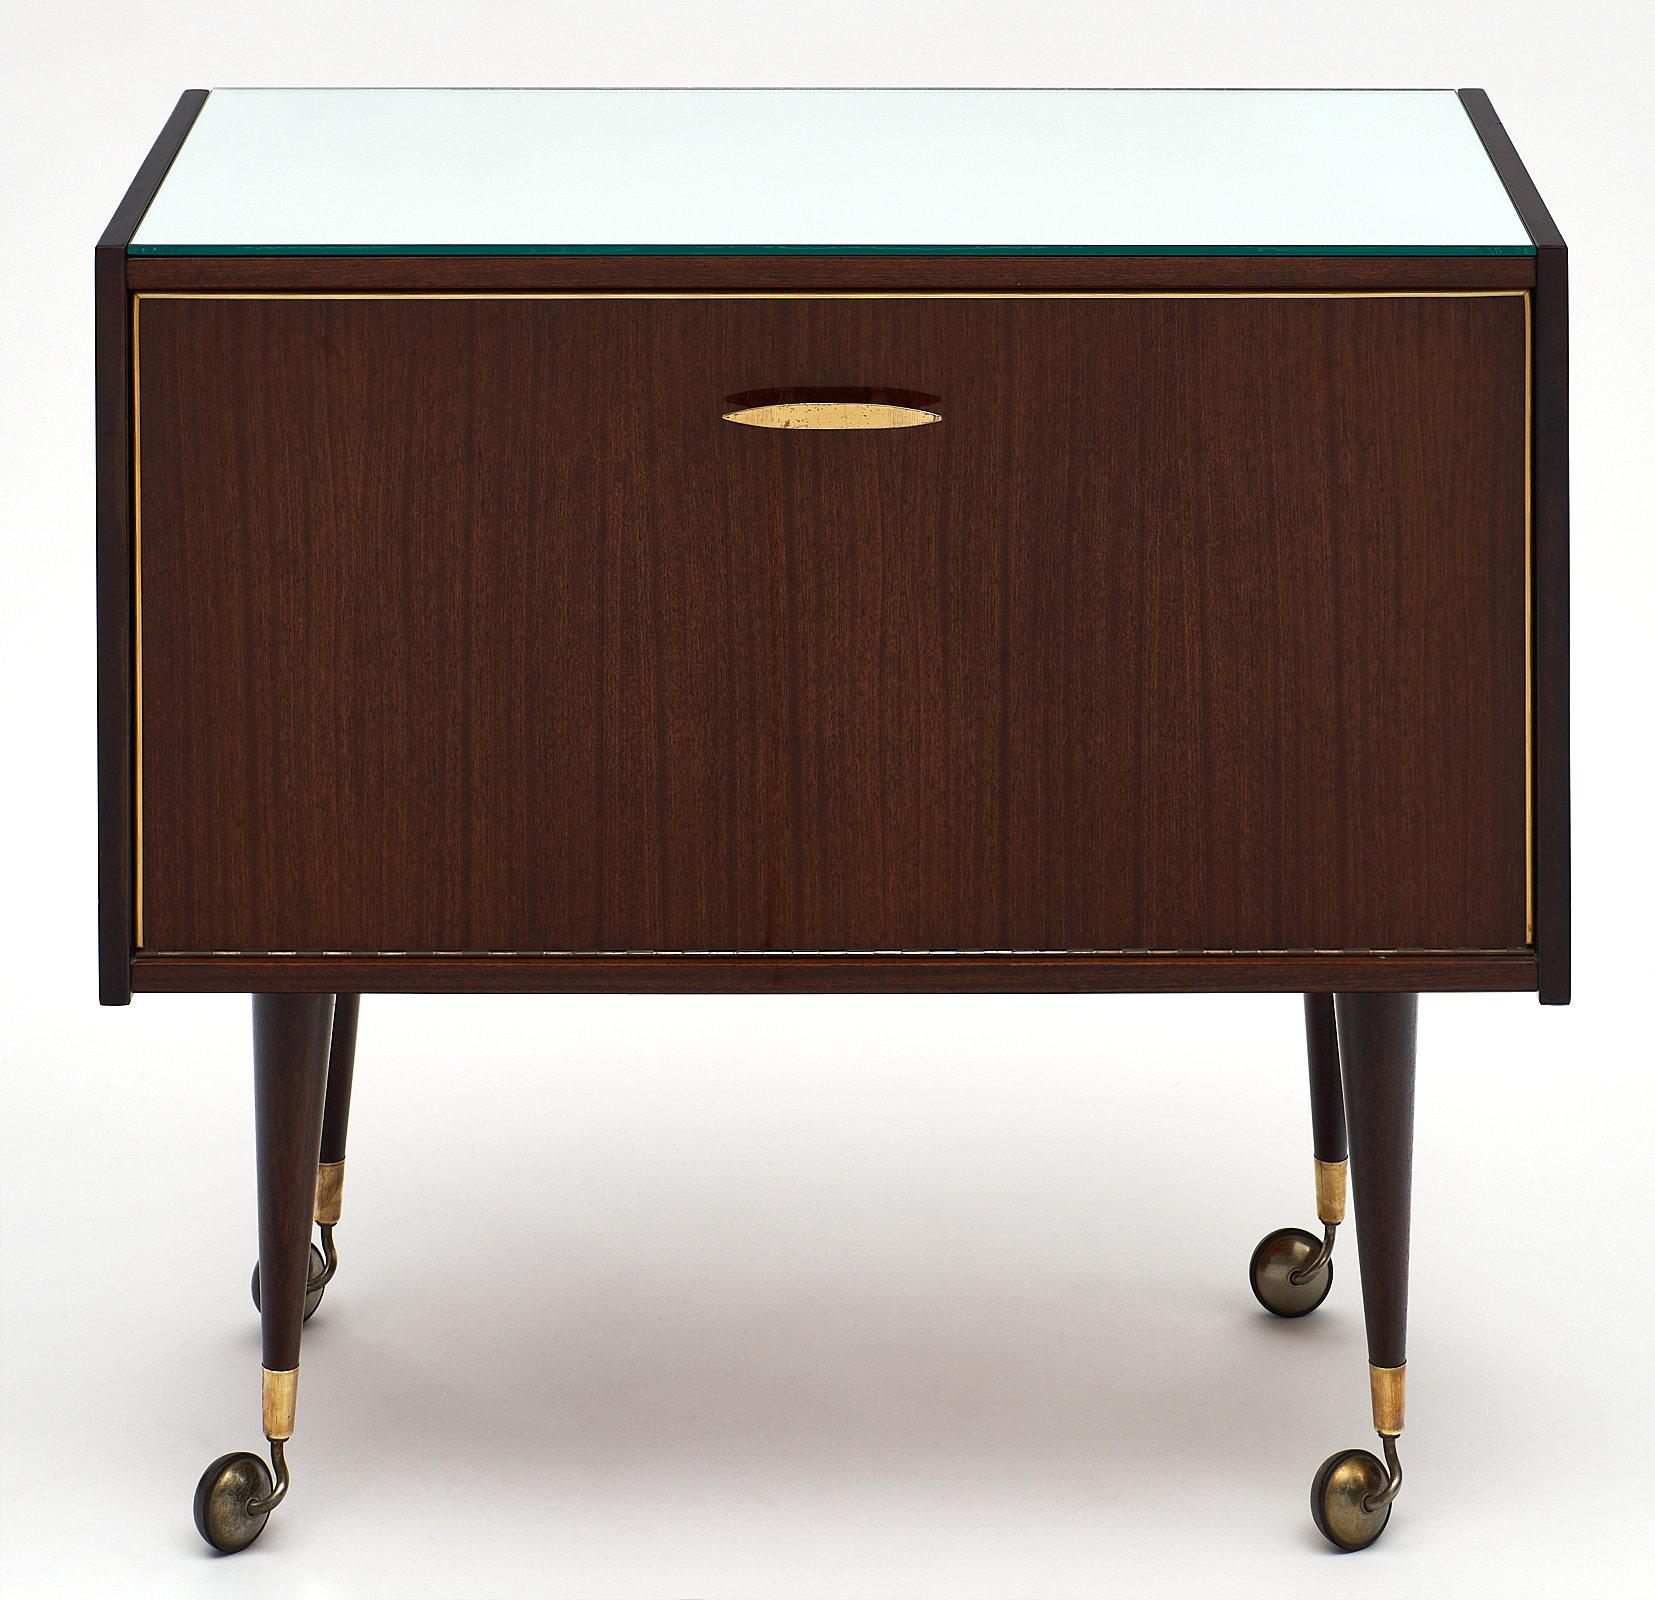 Midcentury vintage rosewood bar cart with mirrored top. This piece features a beautiful rosewood veneer and drop front with brass handle. It opens to a bar compartment including interior shelf for glasses. We love the casters and compact size of